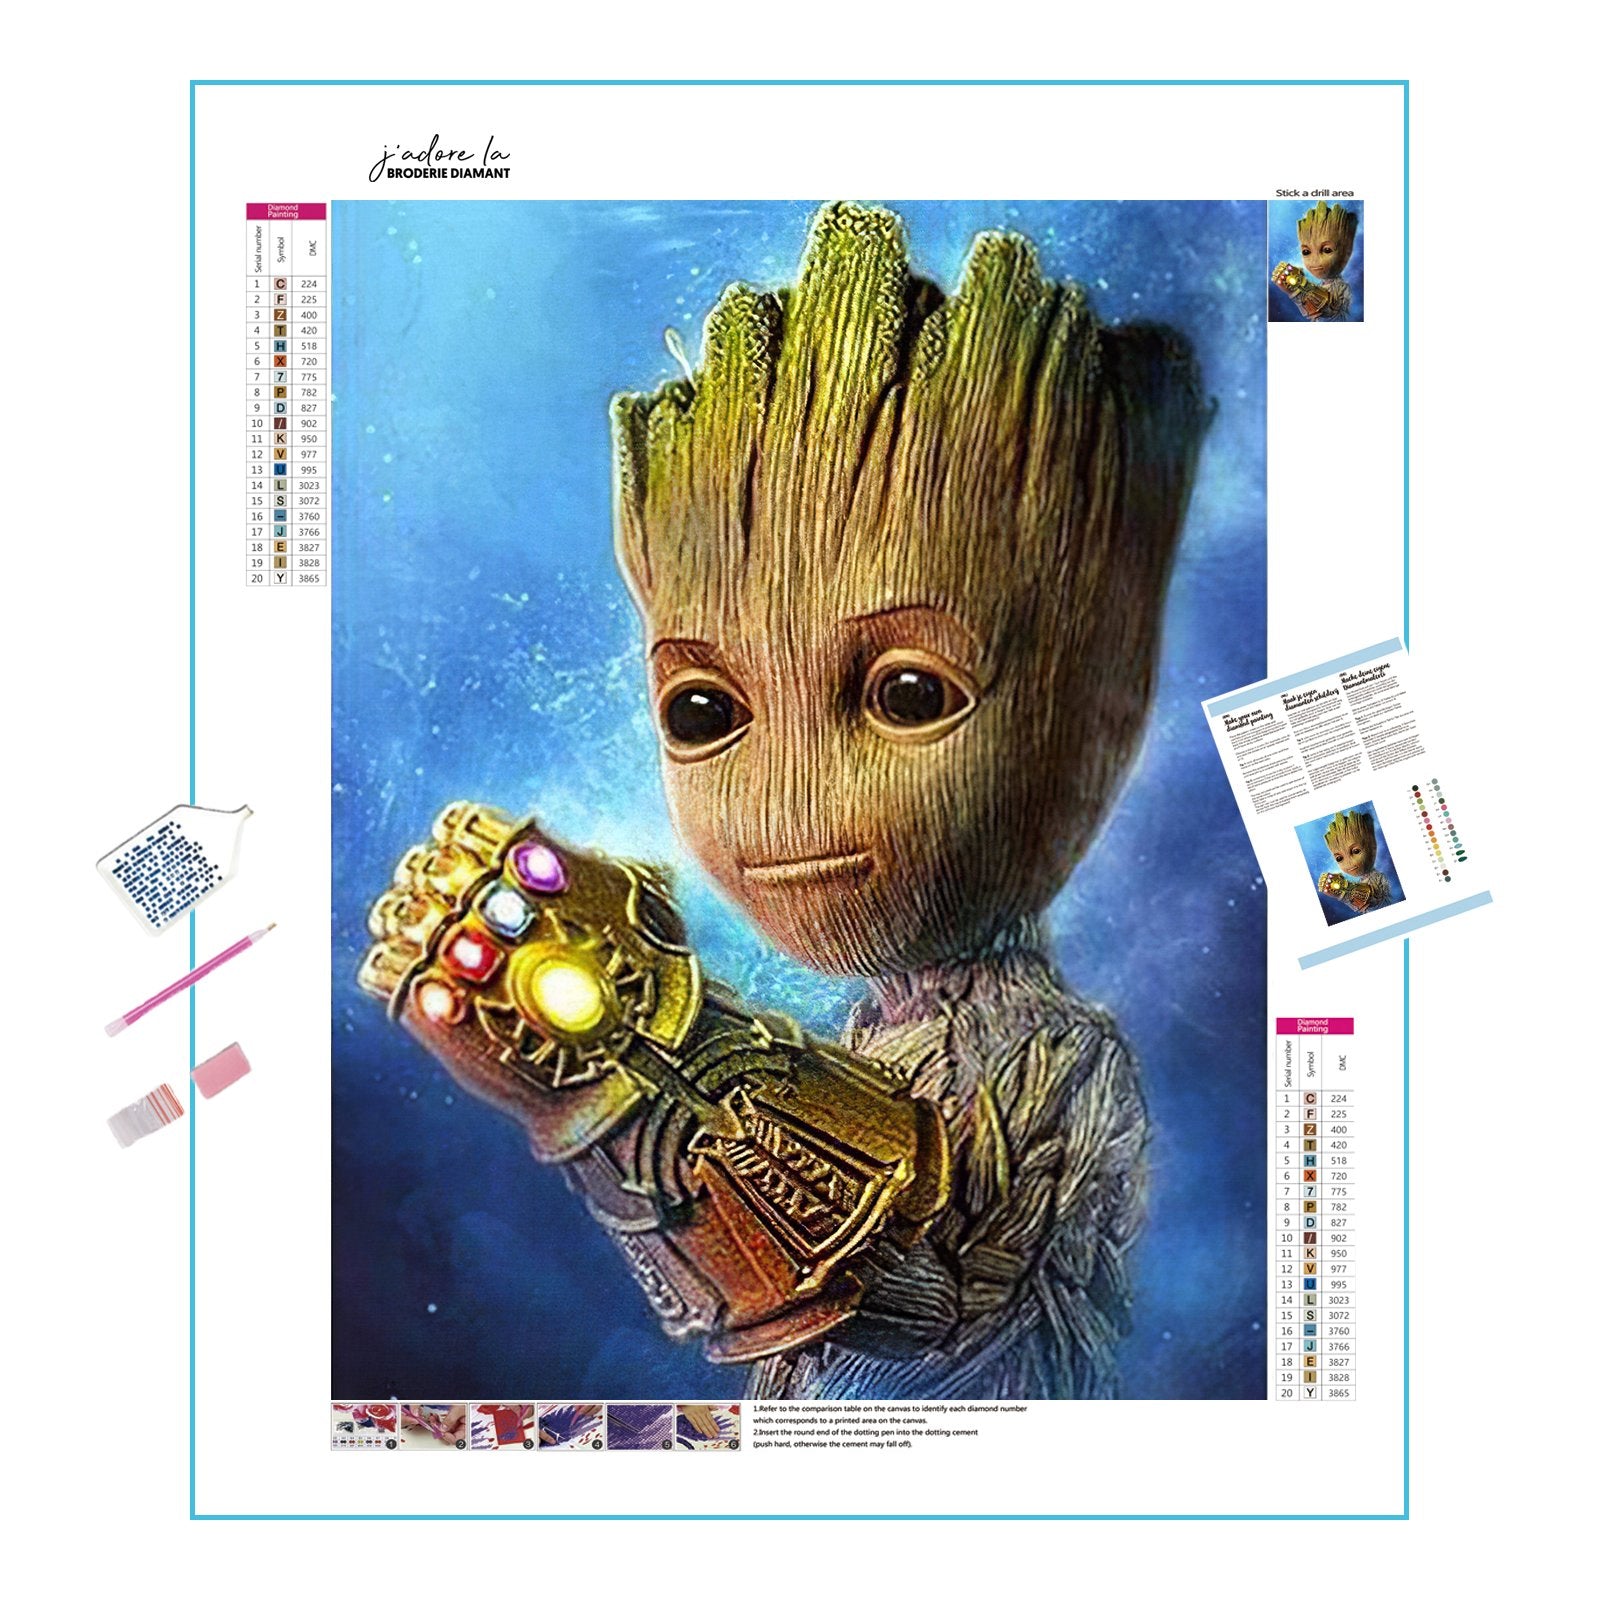 Feel the power of Groot with Thanos' strength in this art.Marvel Groot With Thanos Power - Diamondartlove